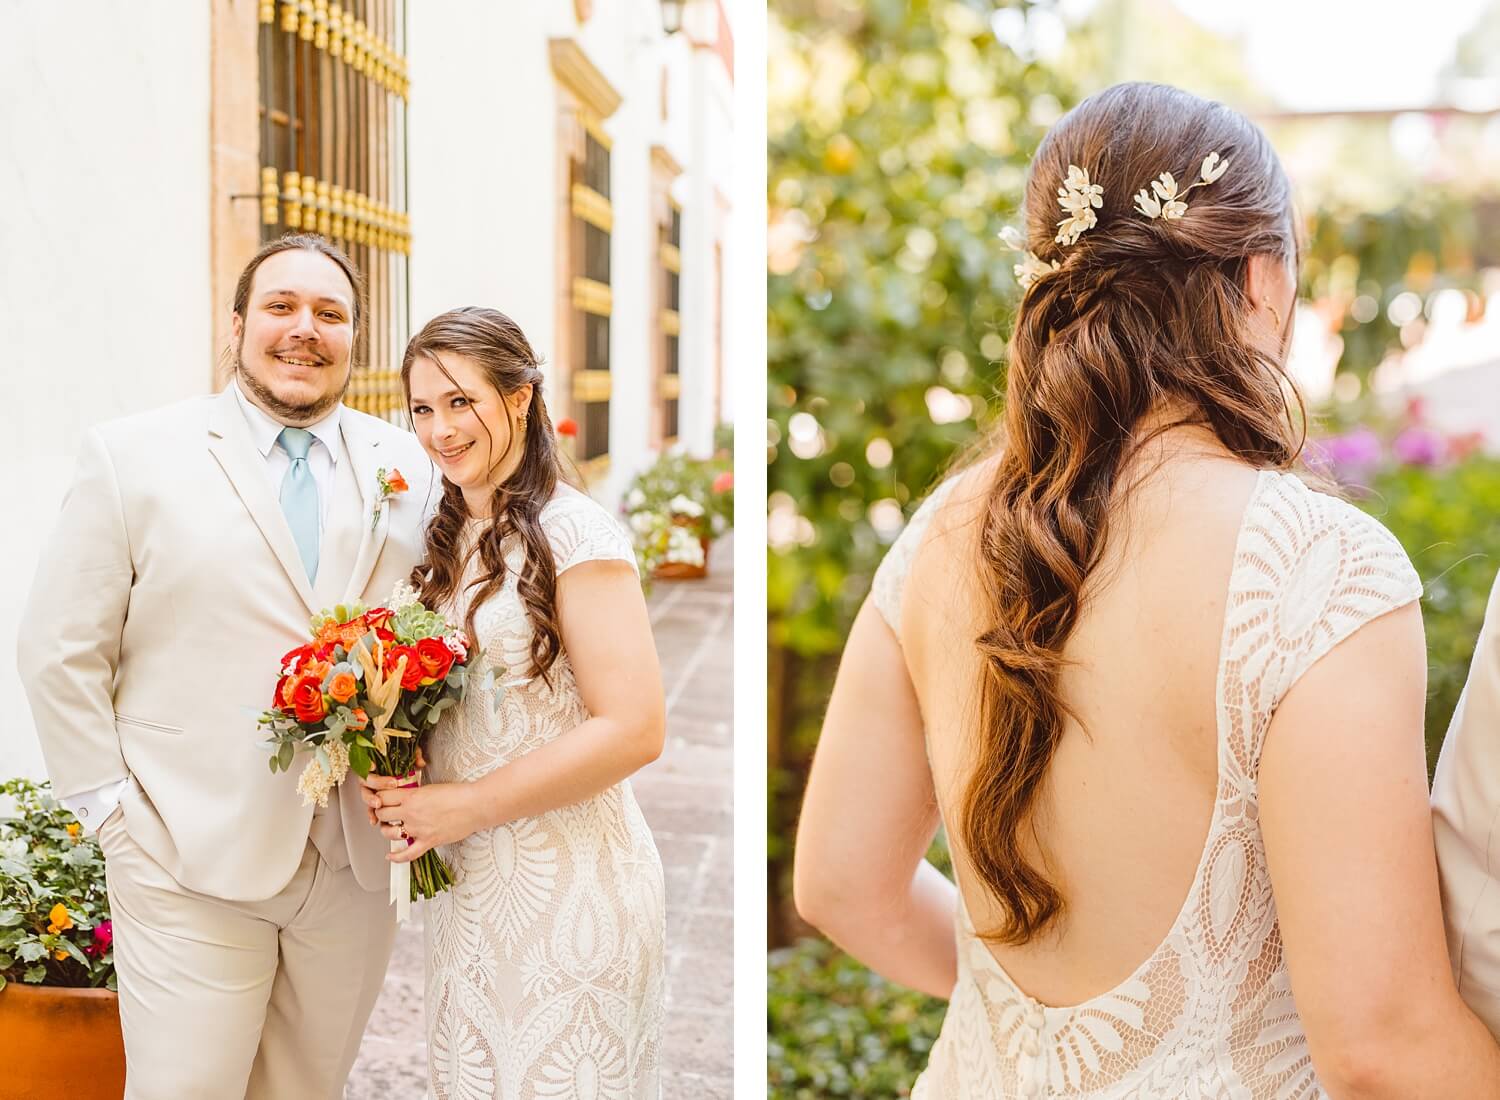 Groom with bride holding red bouquet | Bride wearing low cut lace wedding dress at Mexico destination wedding | Brooke Michelle Photo